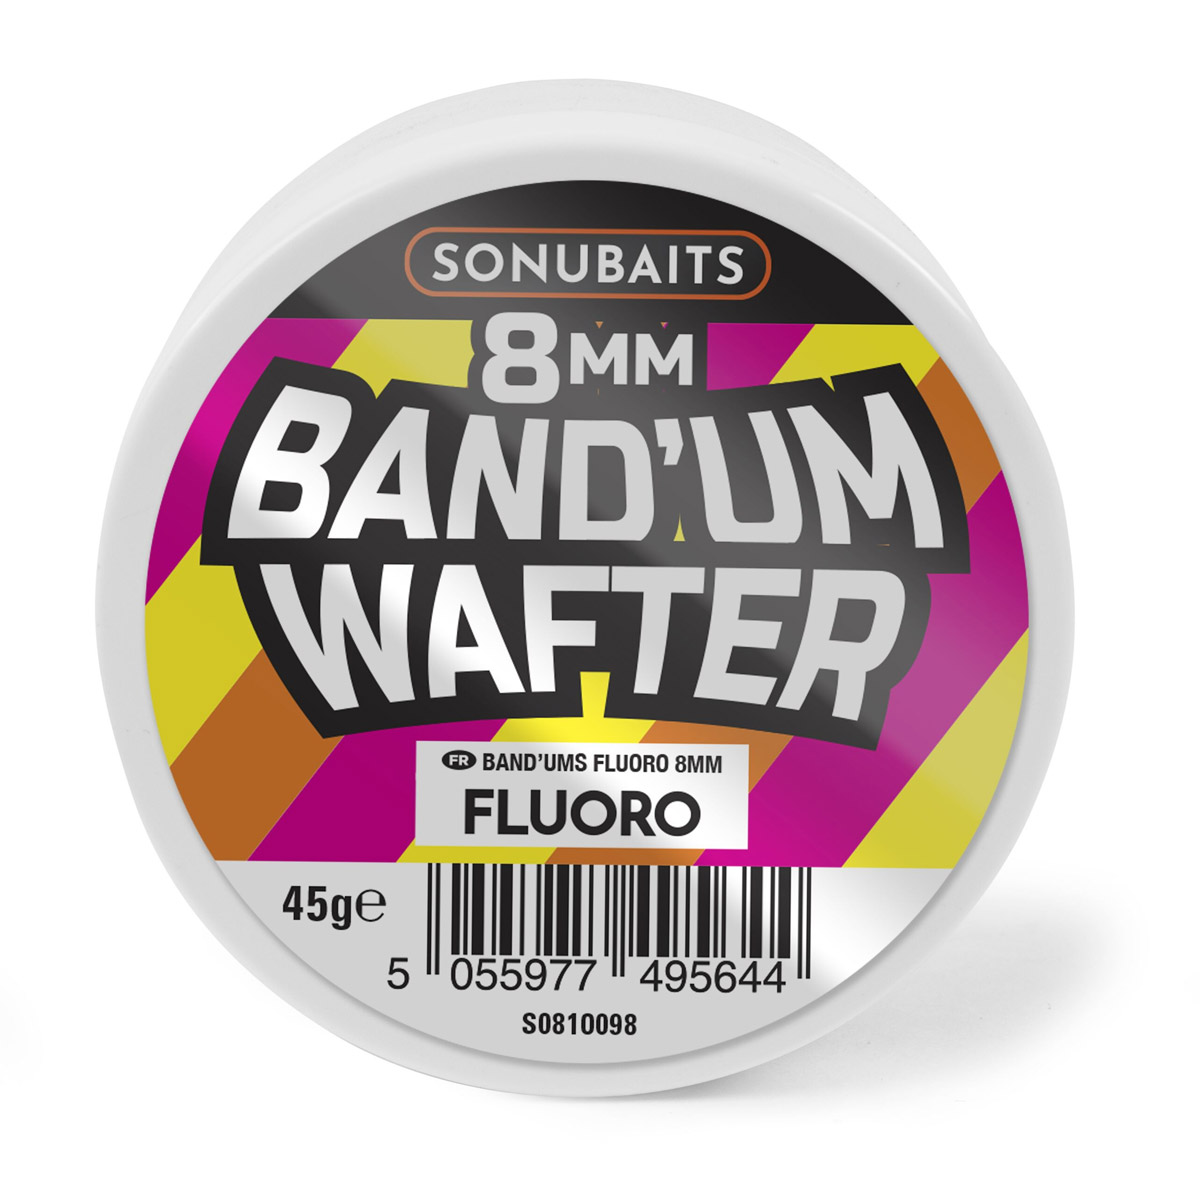 Sonubaits Band'um Wafter Fluoro -  8 mm -  10 mm -  6 mm